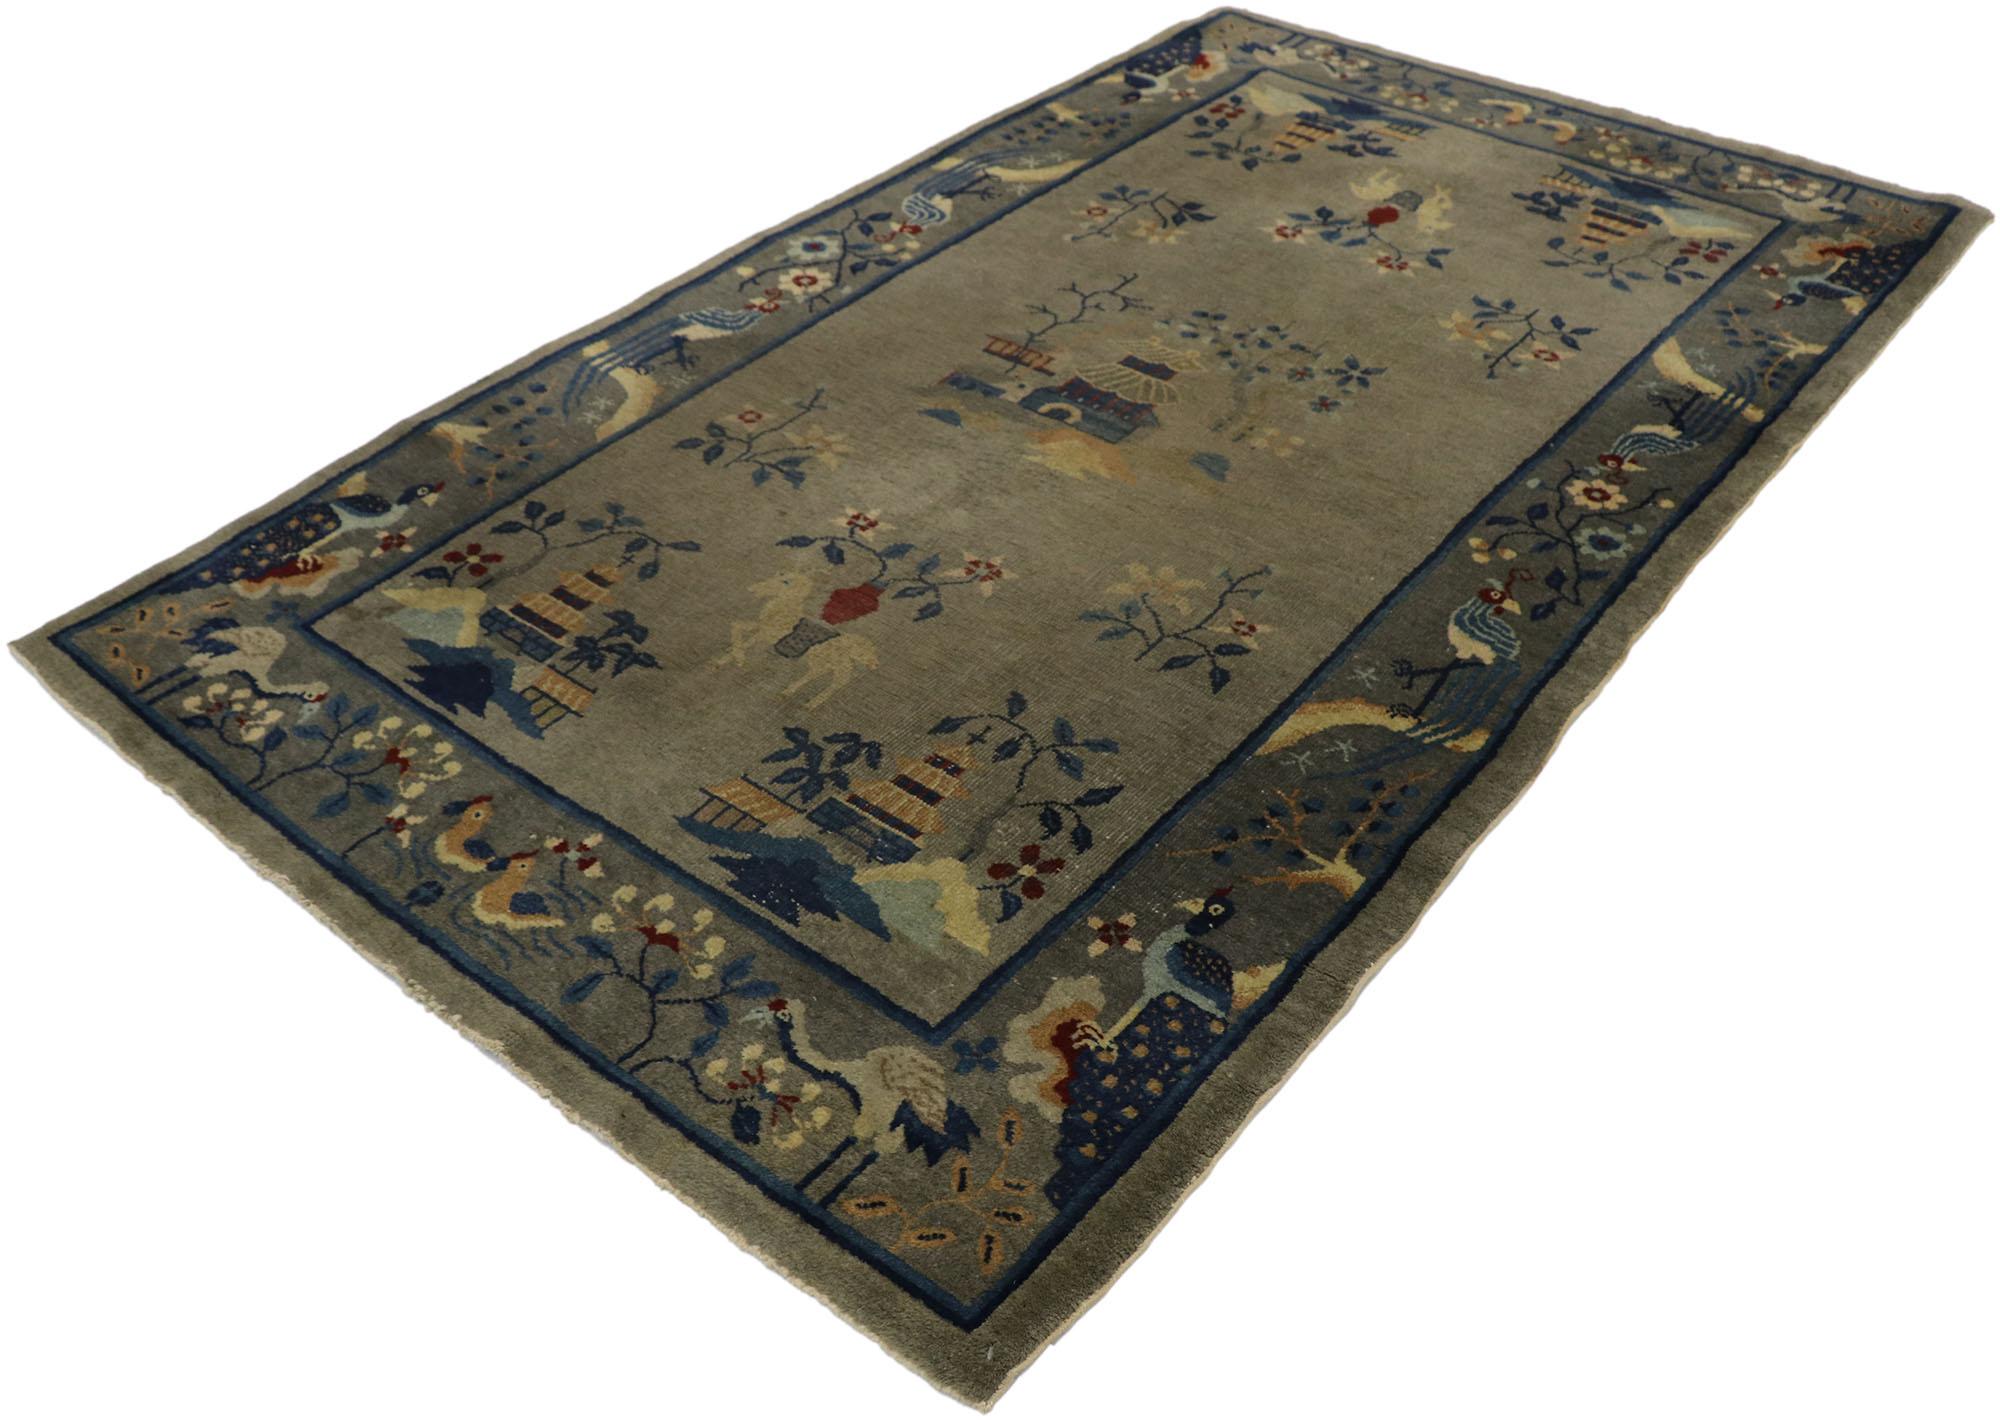 77557 antique Chinese Art Deco rug with Pictorial design. This hand knotted wool antique Chinese Art Deco pictorial rug features a variety of traditional Chinese motifs spread across an abrashed gray field. Floating in the center of the field, a